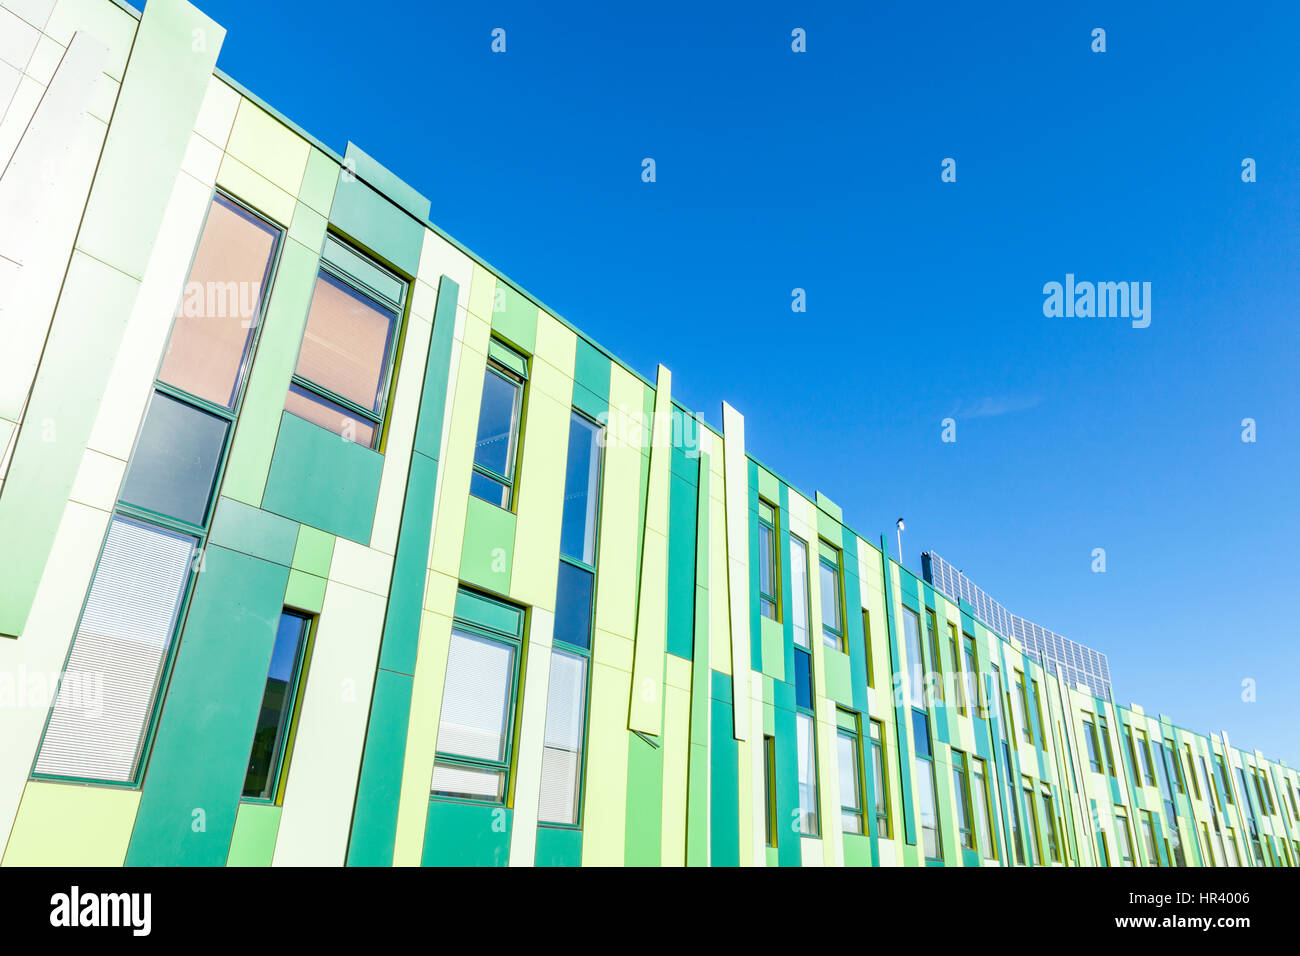 Modern building with abstract architecture. Exemplar Building, Nottingham Science Park, Nottingham, England, UK Stock Photo